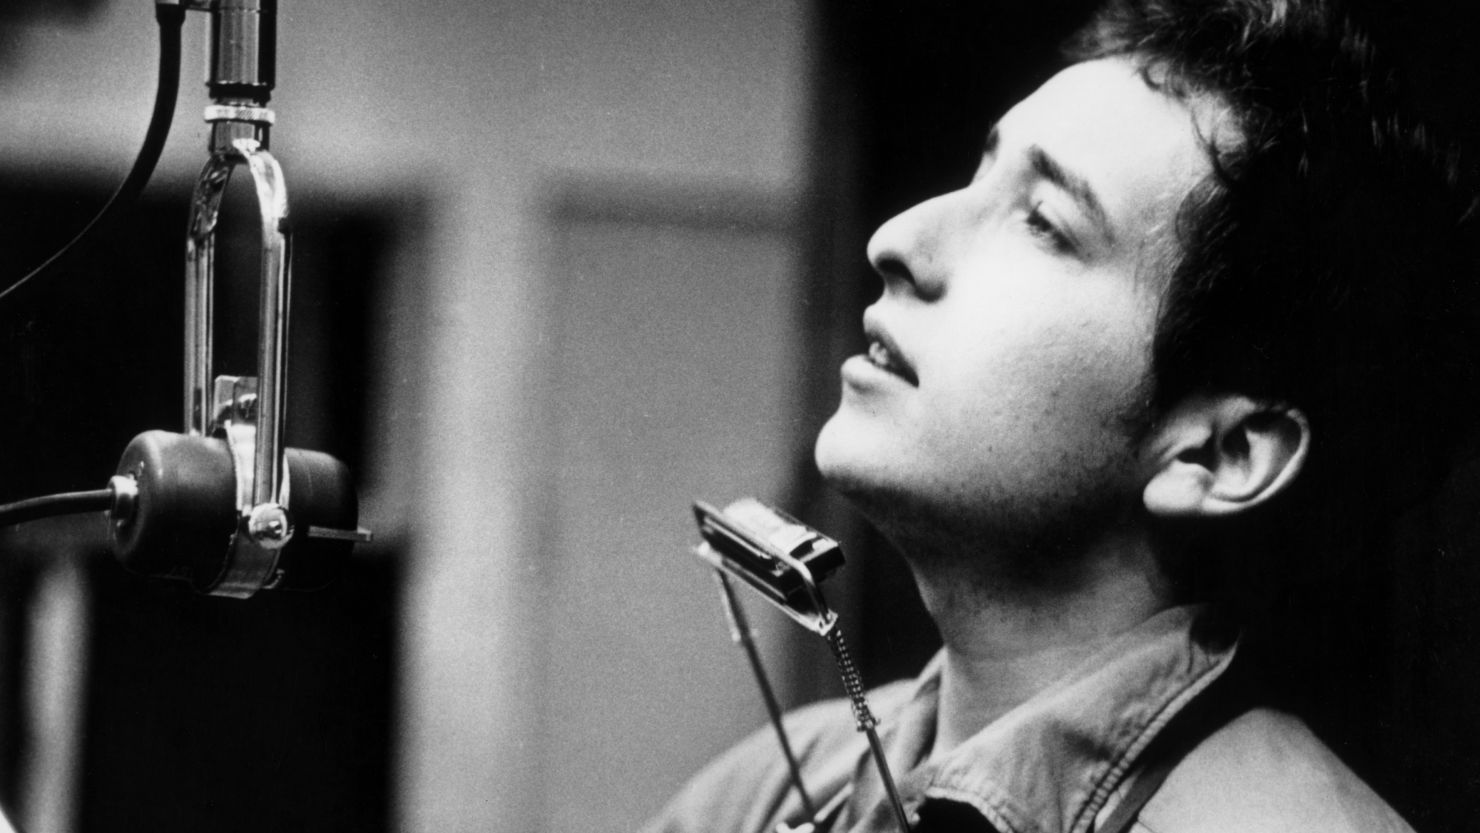 Bob Dylan shown recording his first album in New York City in 1961.